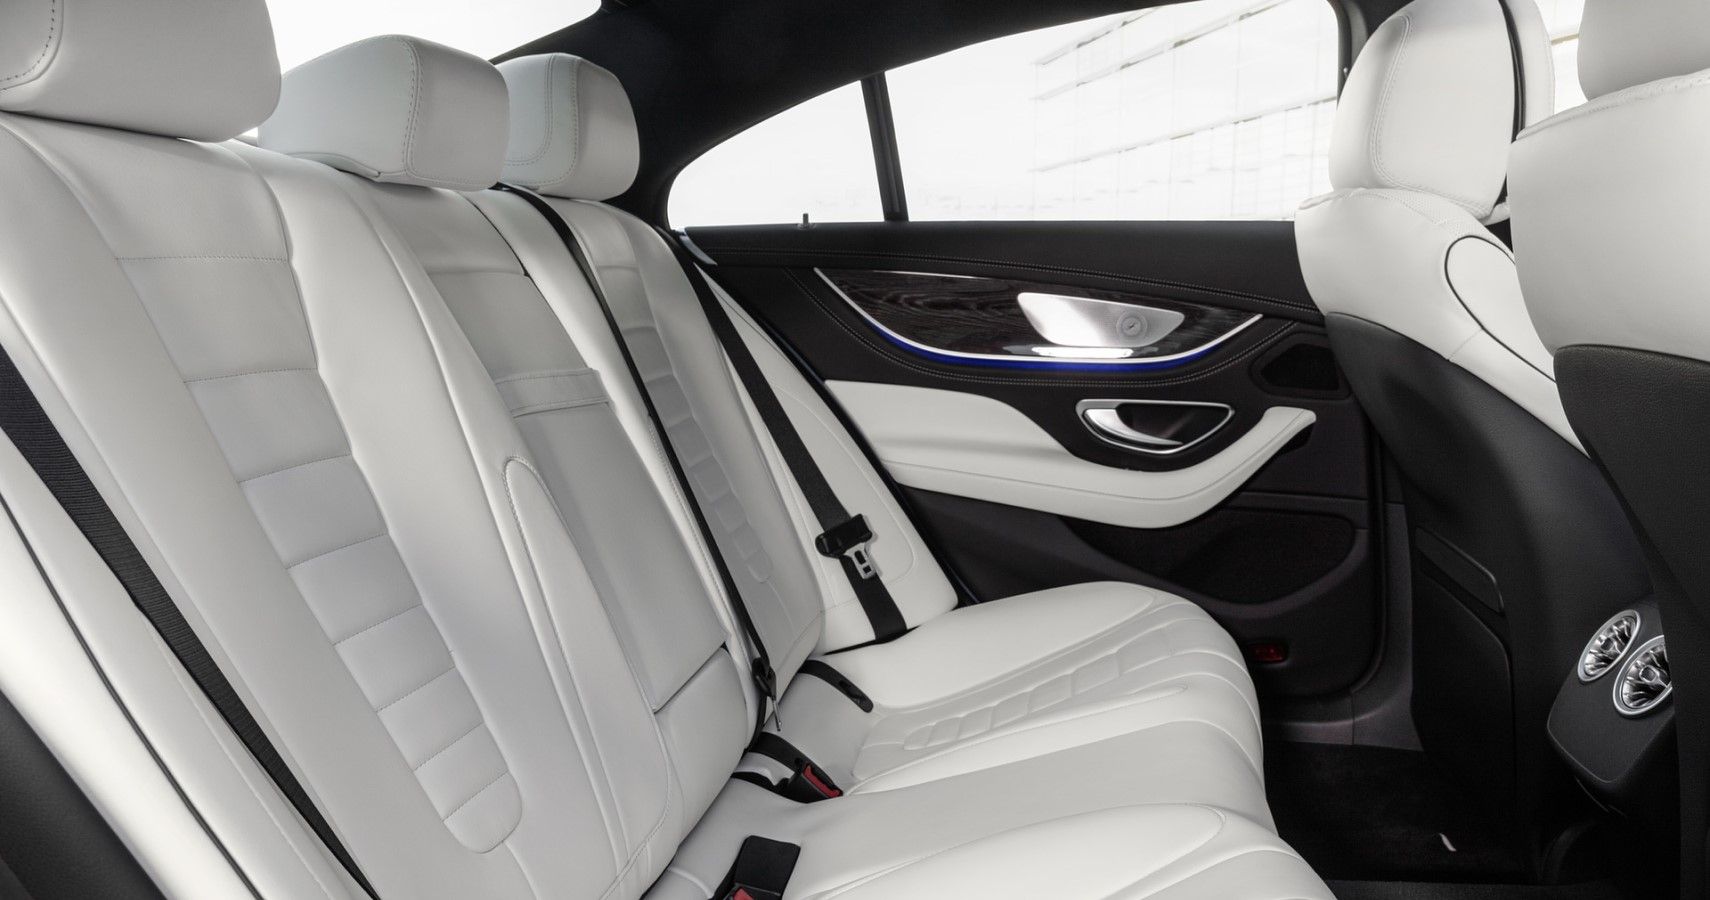 2022 Mercedes-Benz CLS-Class second row seating layout